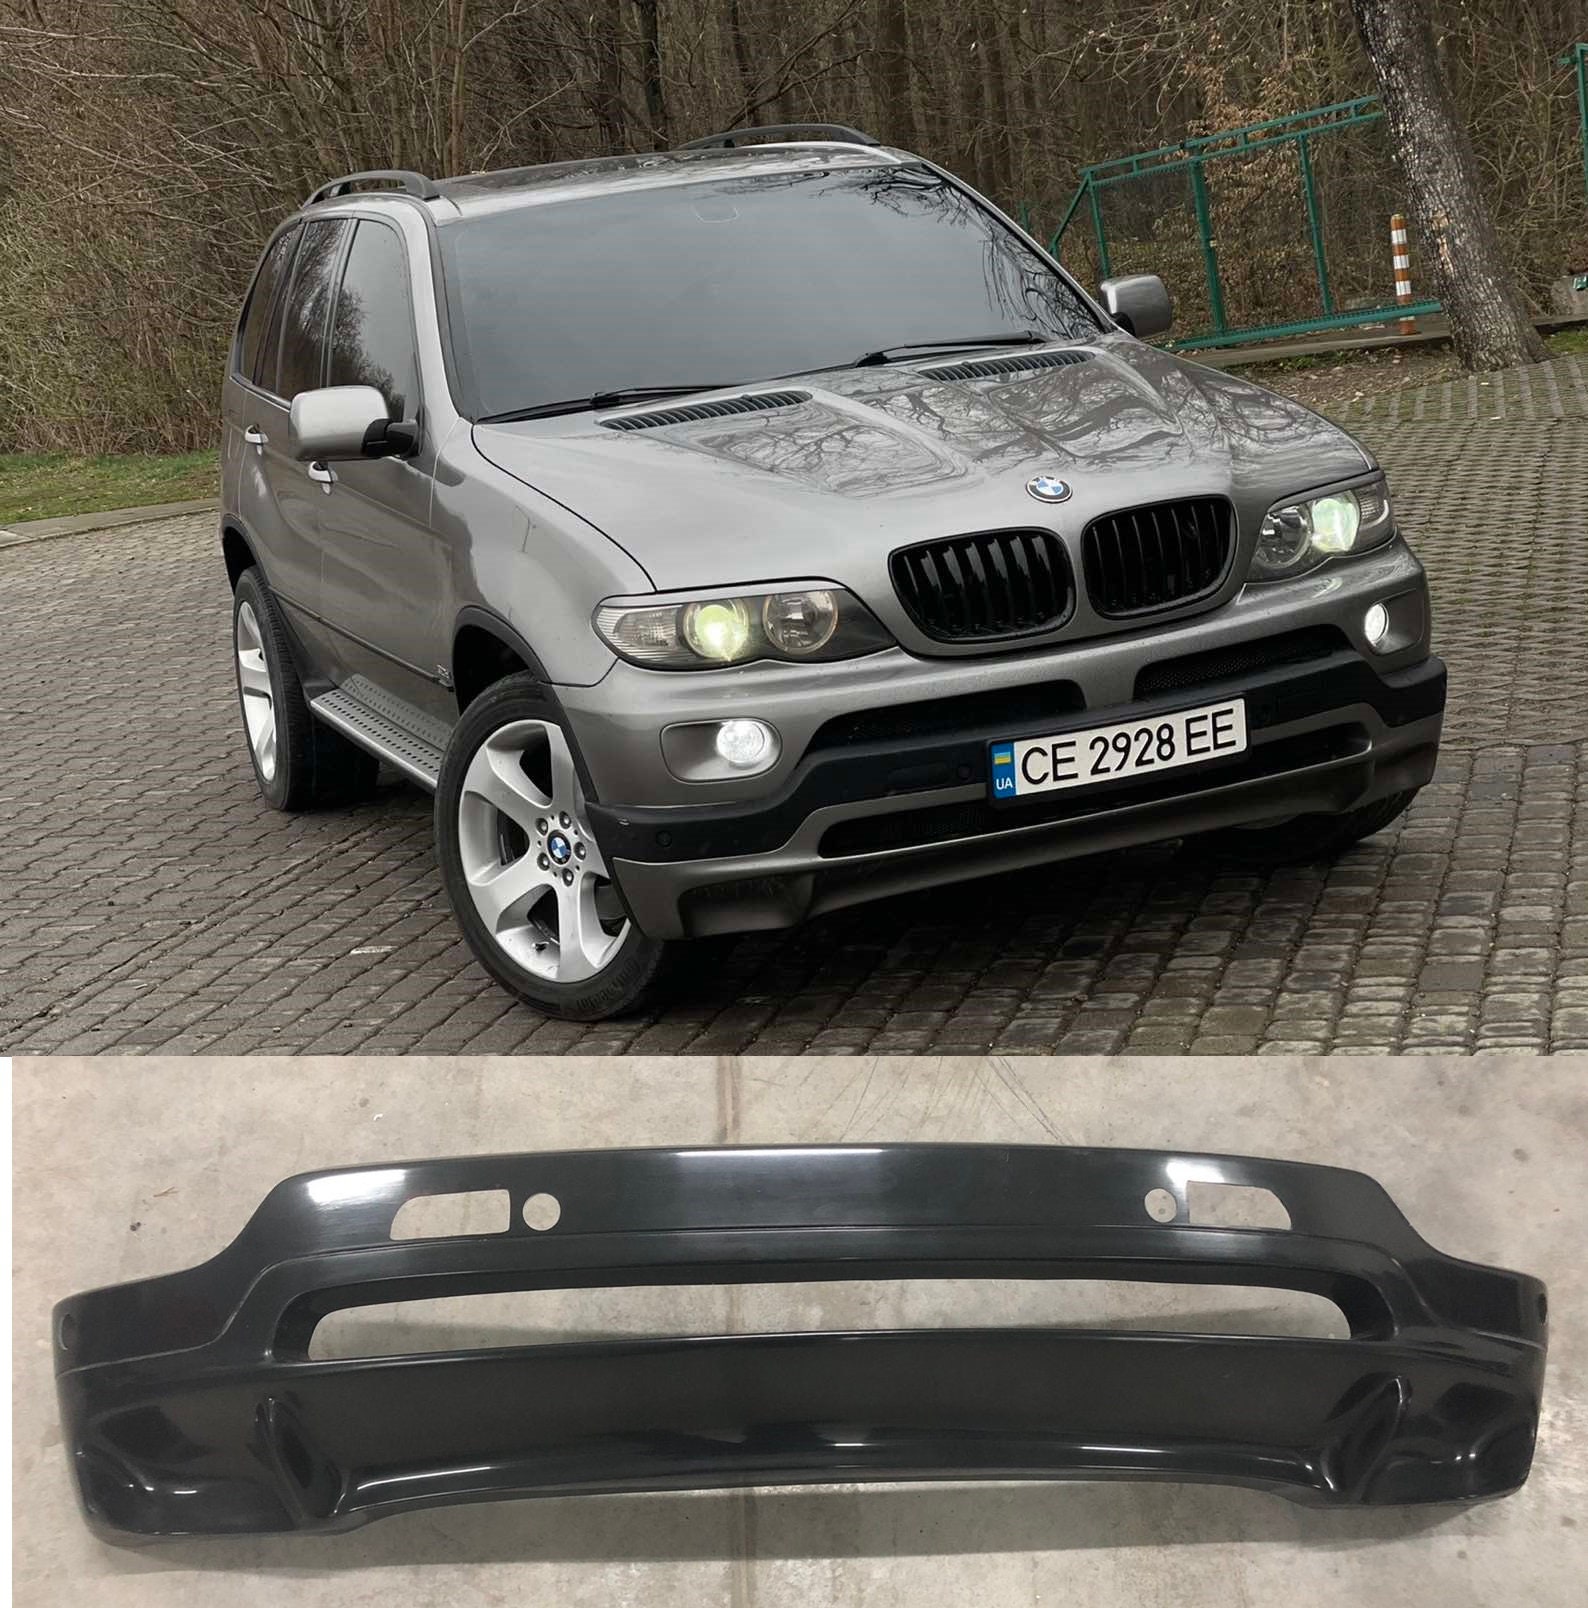 4.6is Bodykit for BMW X5 E53 Body Kit Tuning Spoiler Front and rear bumper  lip: Buy Online at Best Price in UAE 